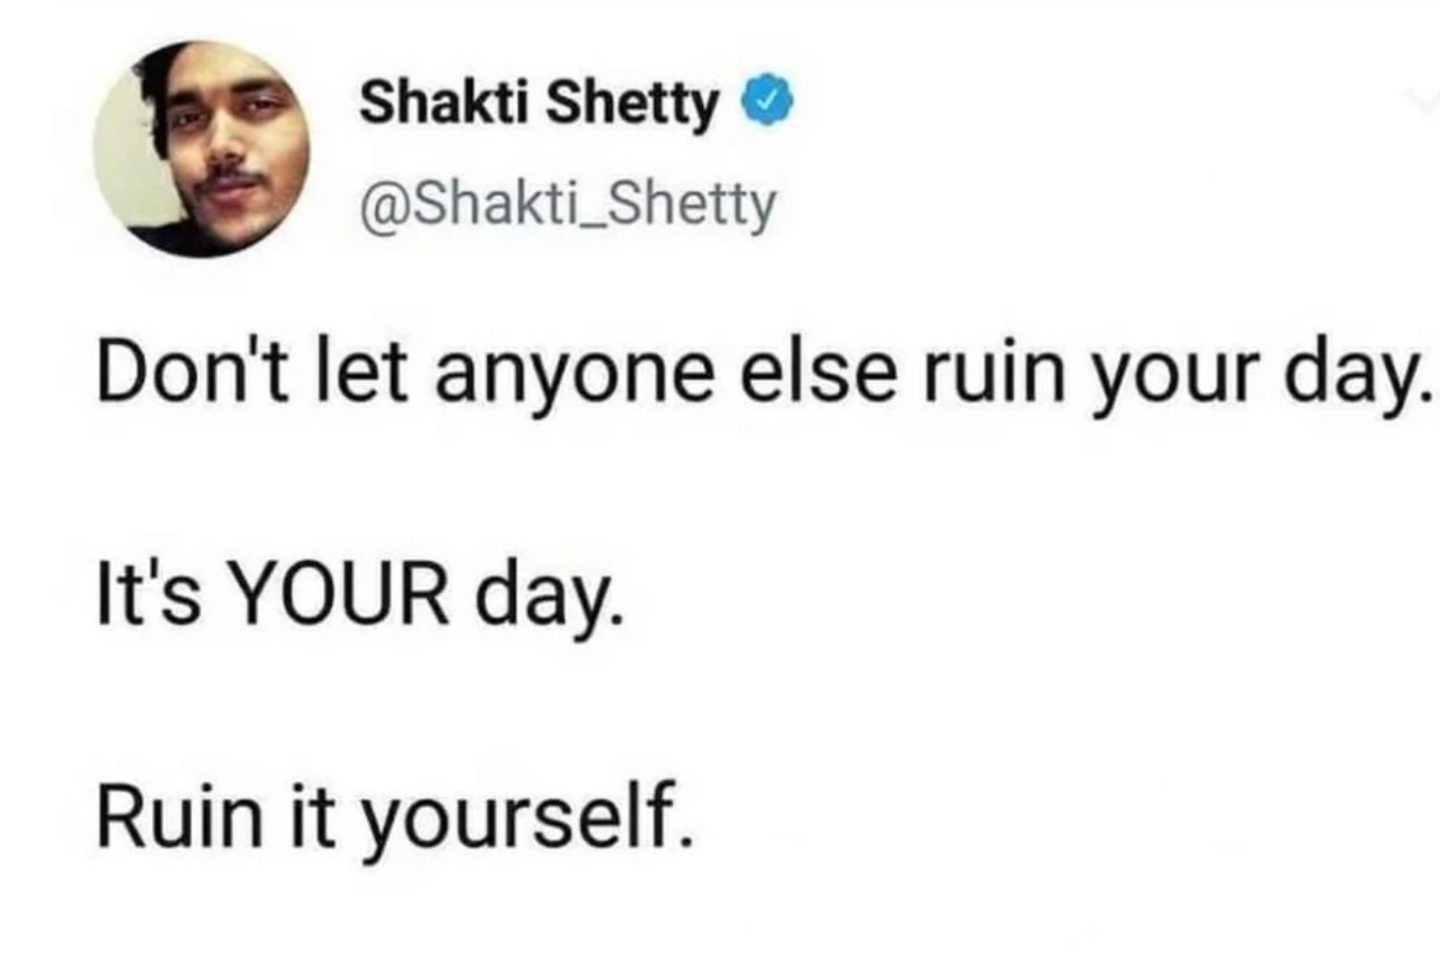 don't let anyone else ruin your day, it's your day, ruin it yourself